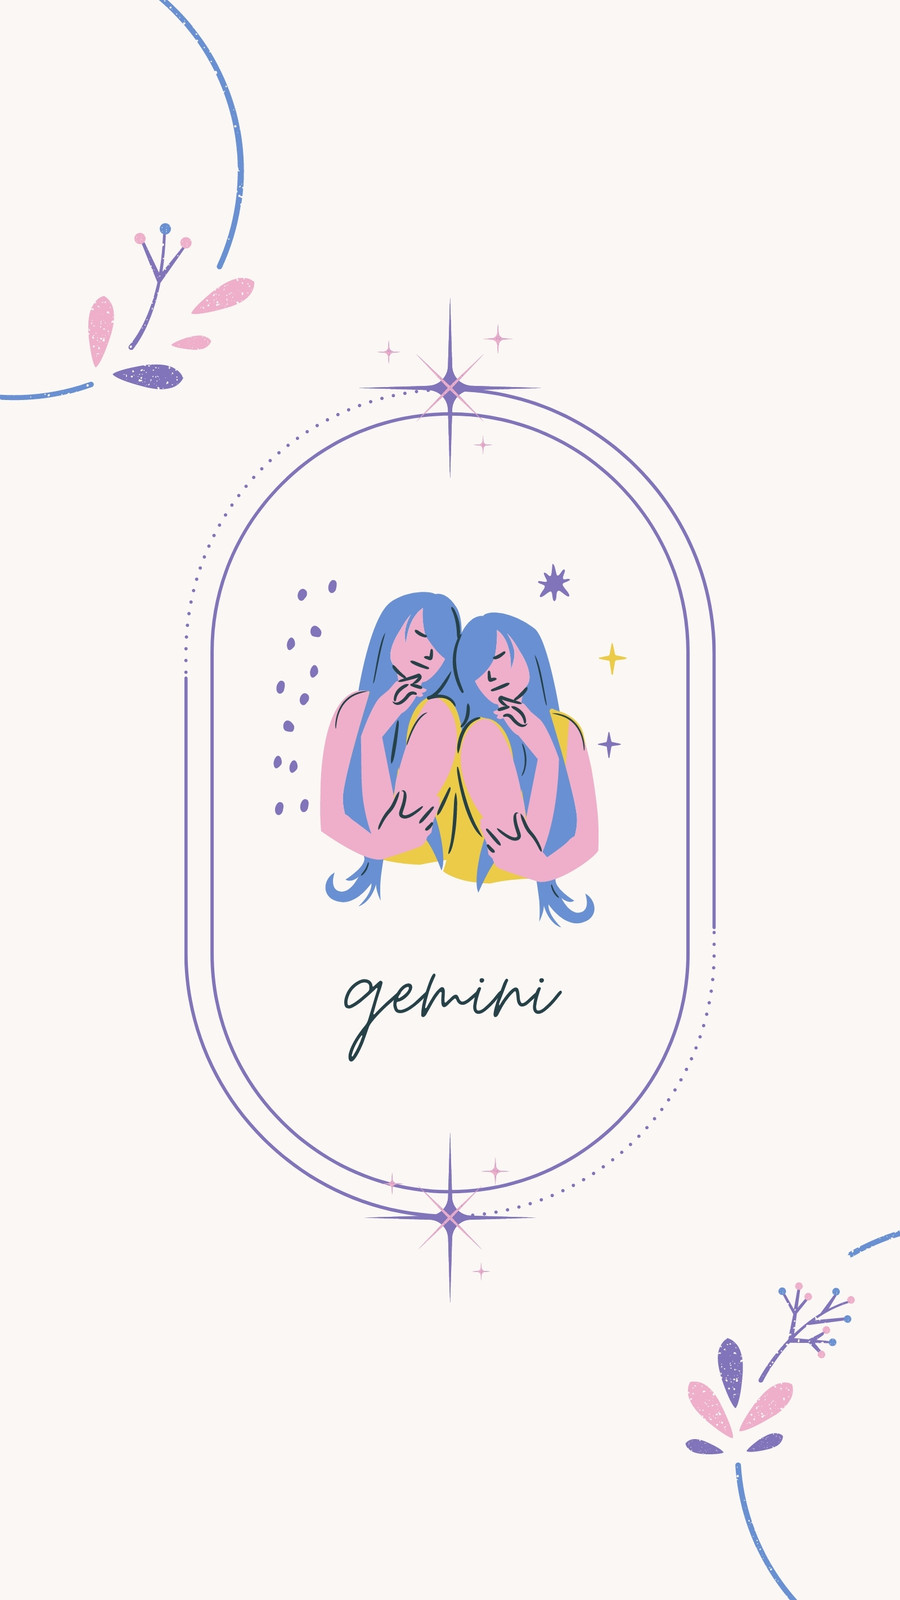 Premium Vector  Horoscope zodiac sign gemini in constellation style with  line and stars on dark background collection of zodiac symbols set of  constellations of stars